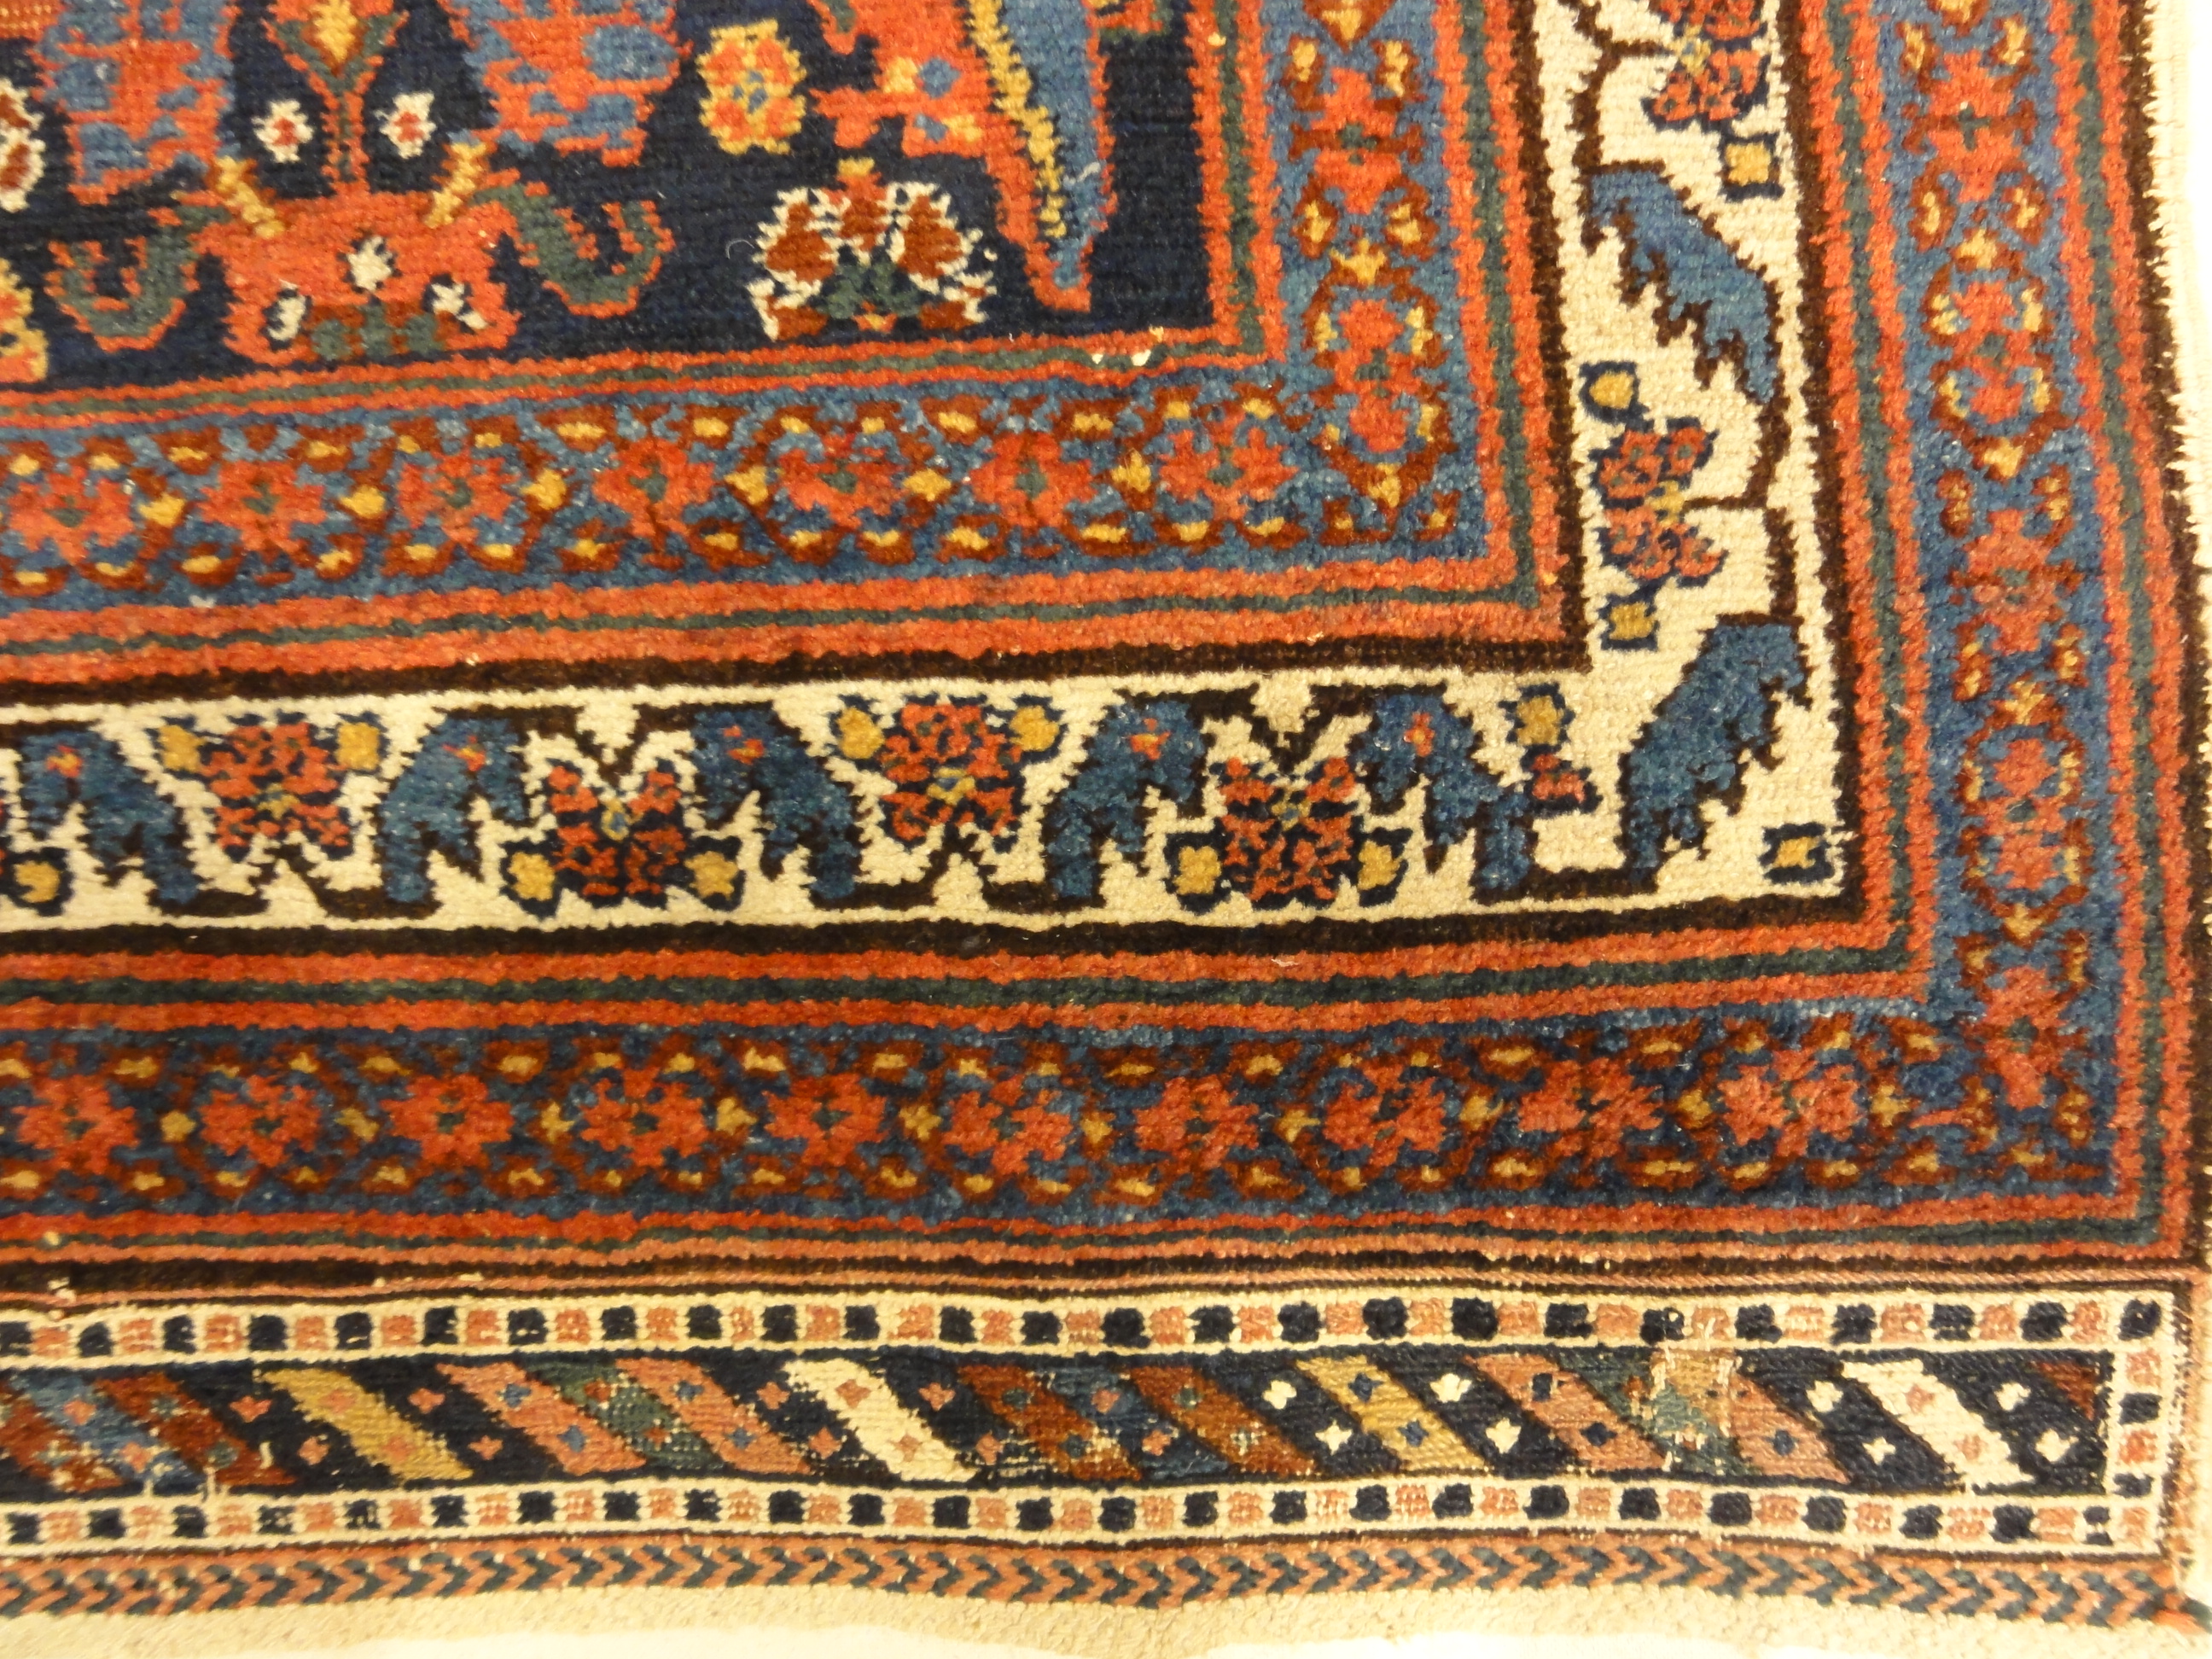 Antique Persian Afshar Herati Rug Genuine Authentic Intricate Woven Carpet Art Santa Barbara Design Center and Rugs and More